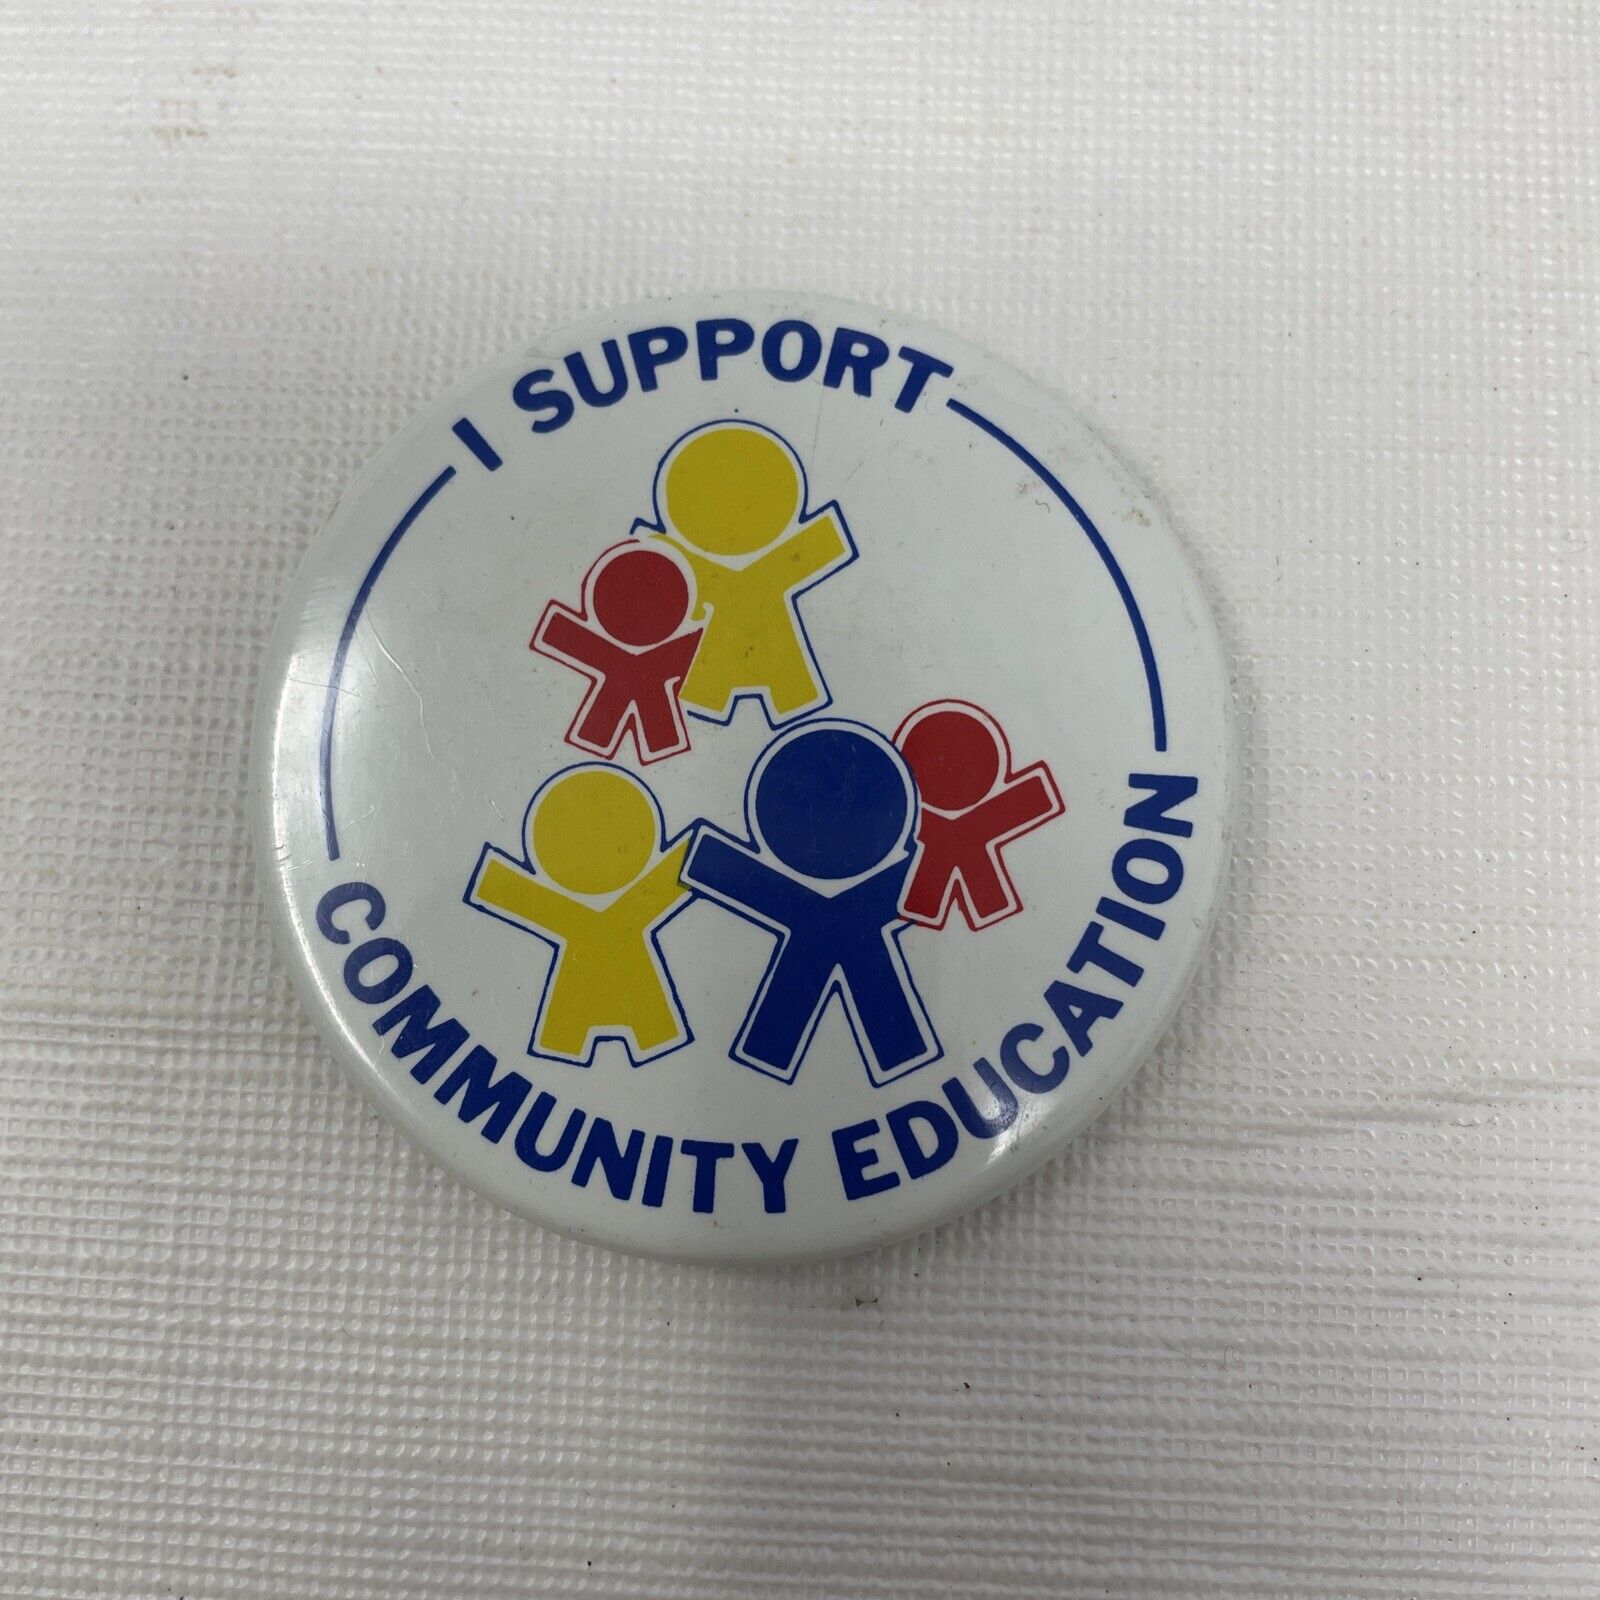 I Support Community Education Button Pin